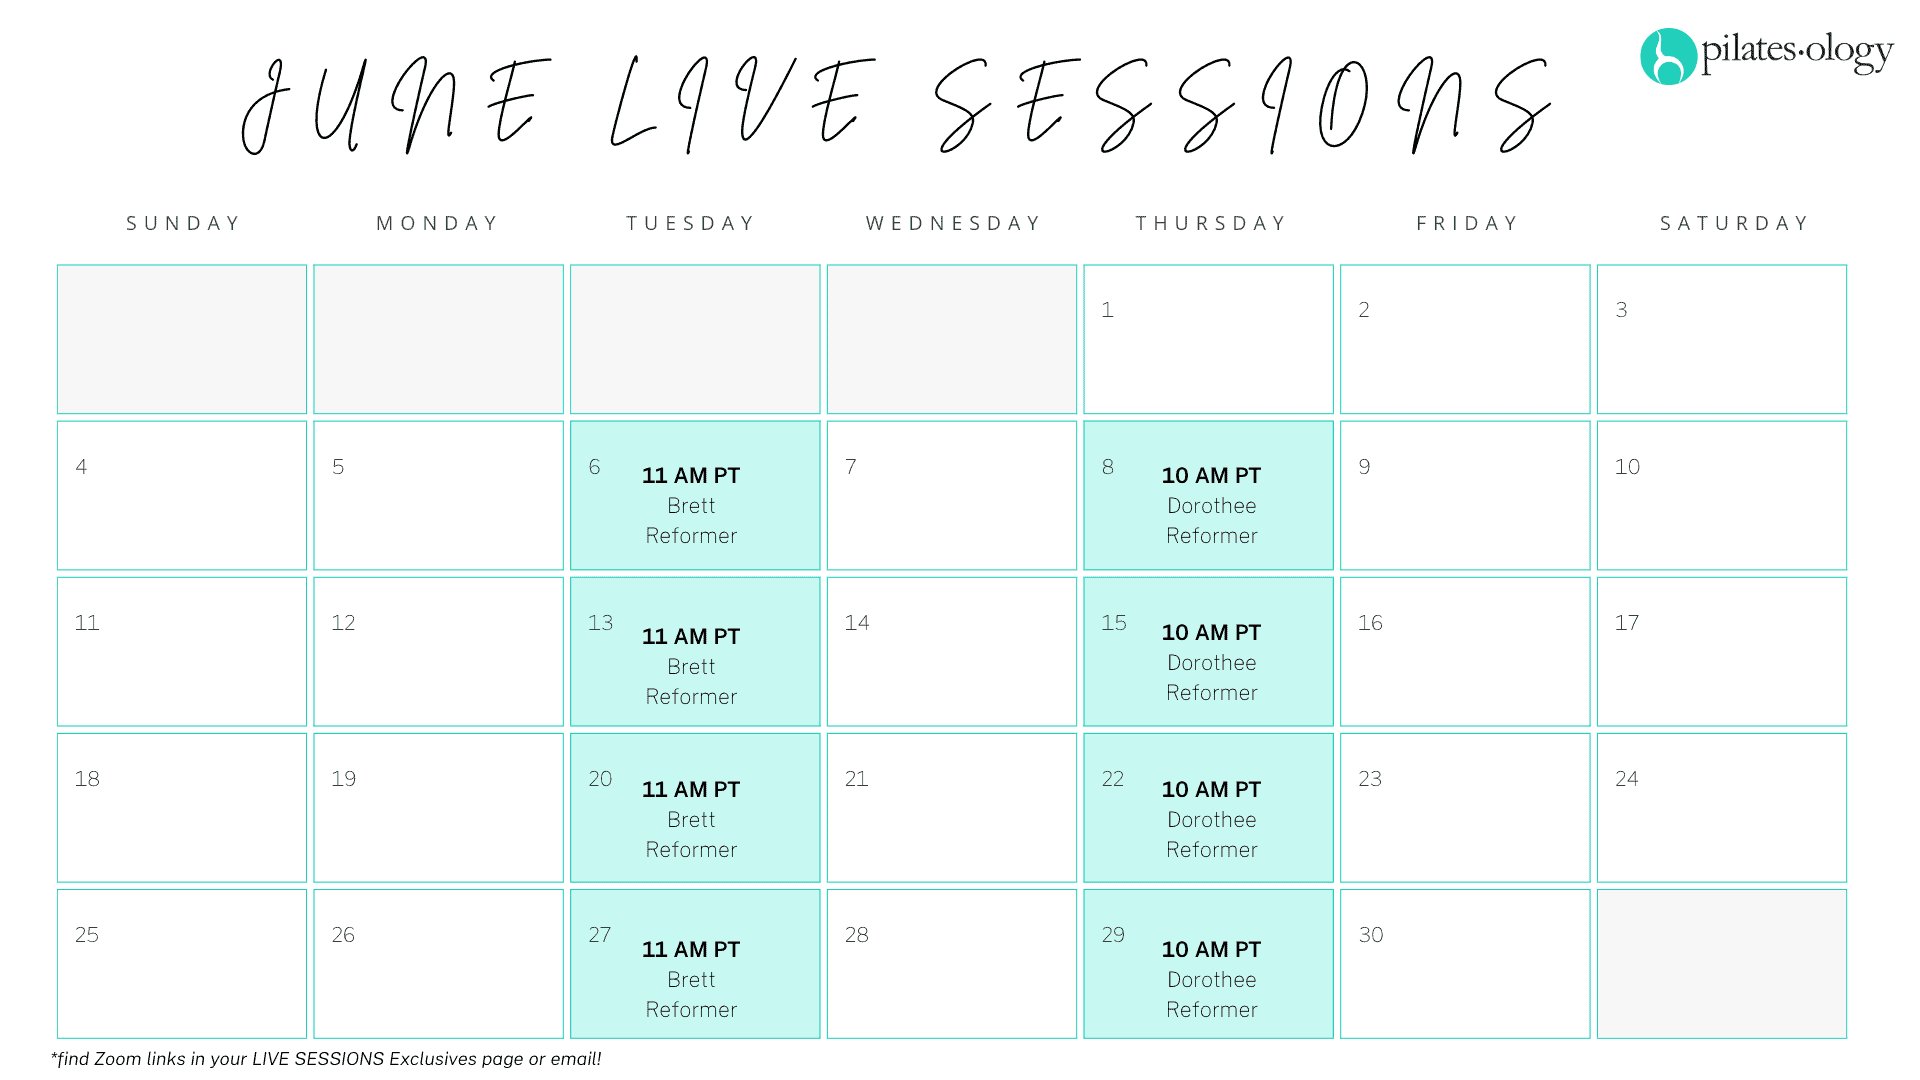 LIVE SESSIONS CALENDAR_with rescheduling